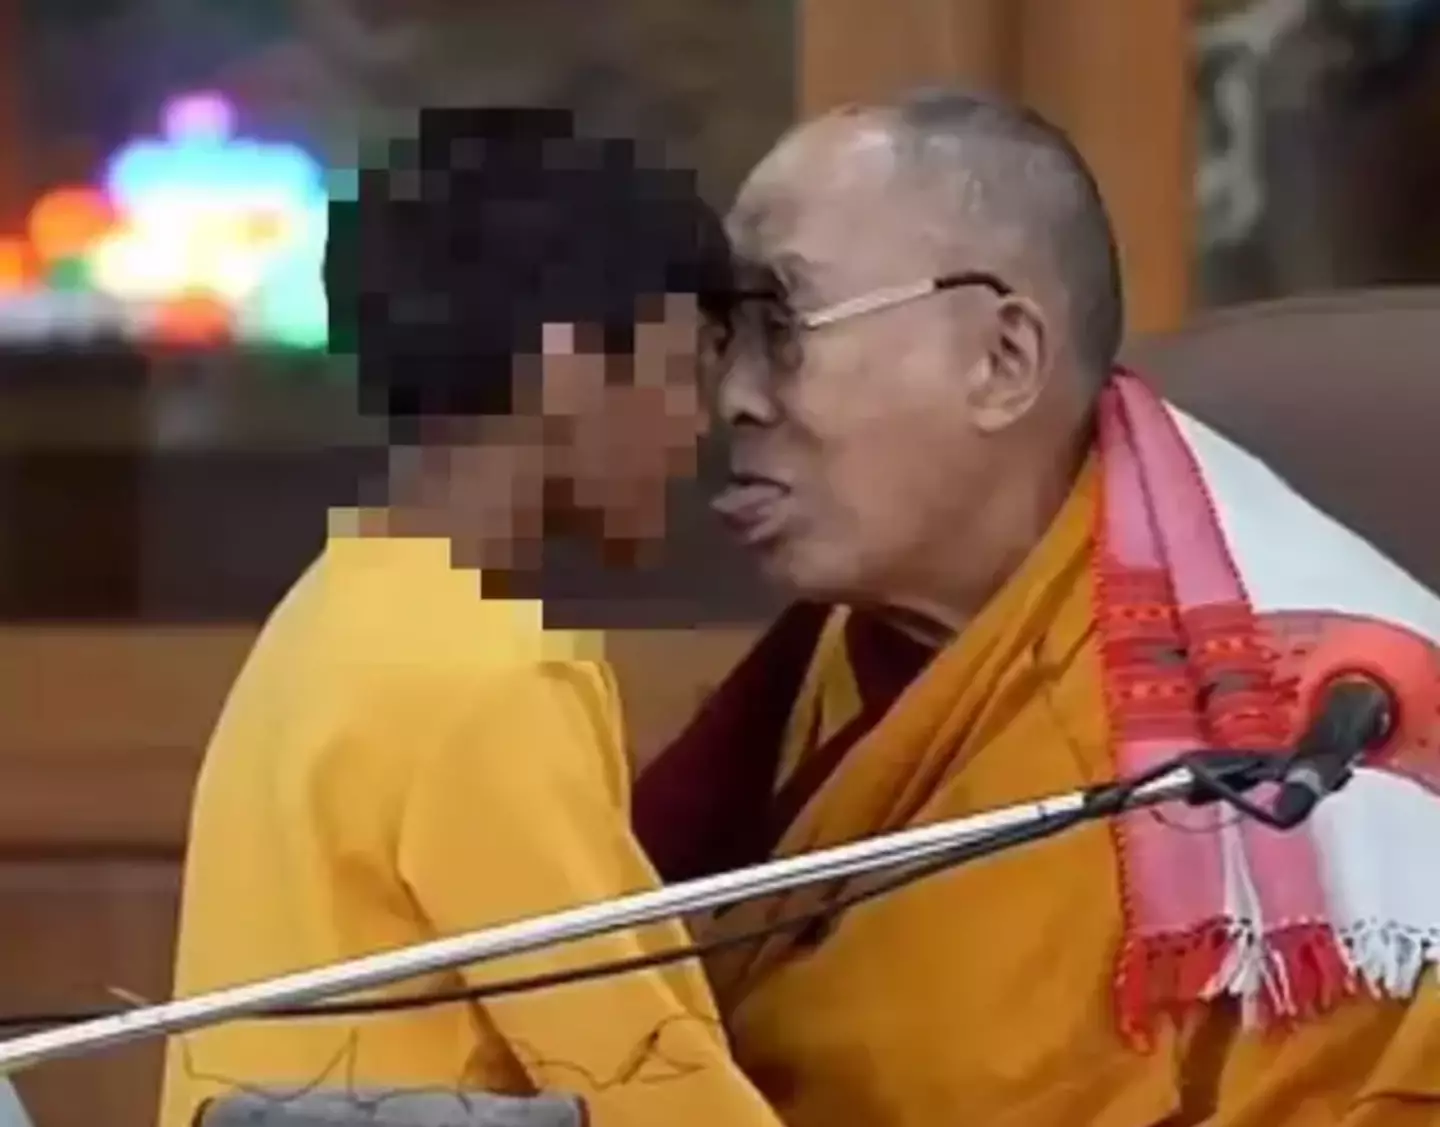 The Dalai Lama has been forced to apologise for the viral video.